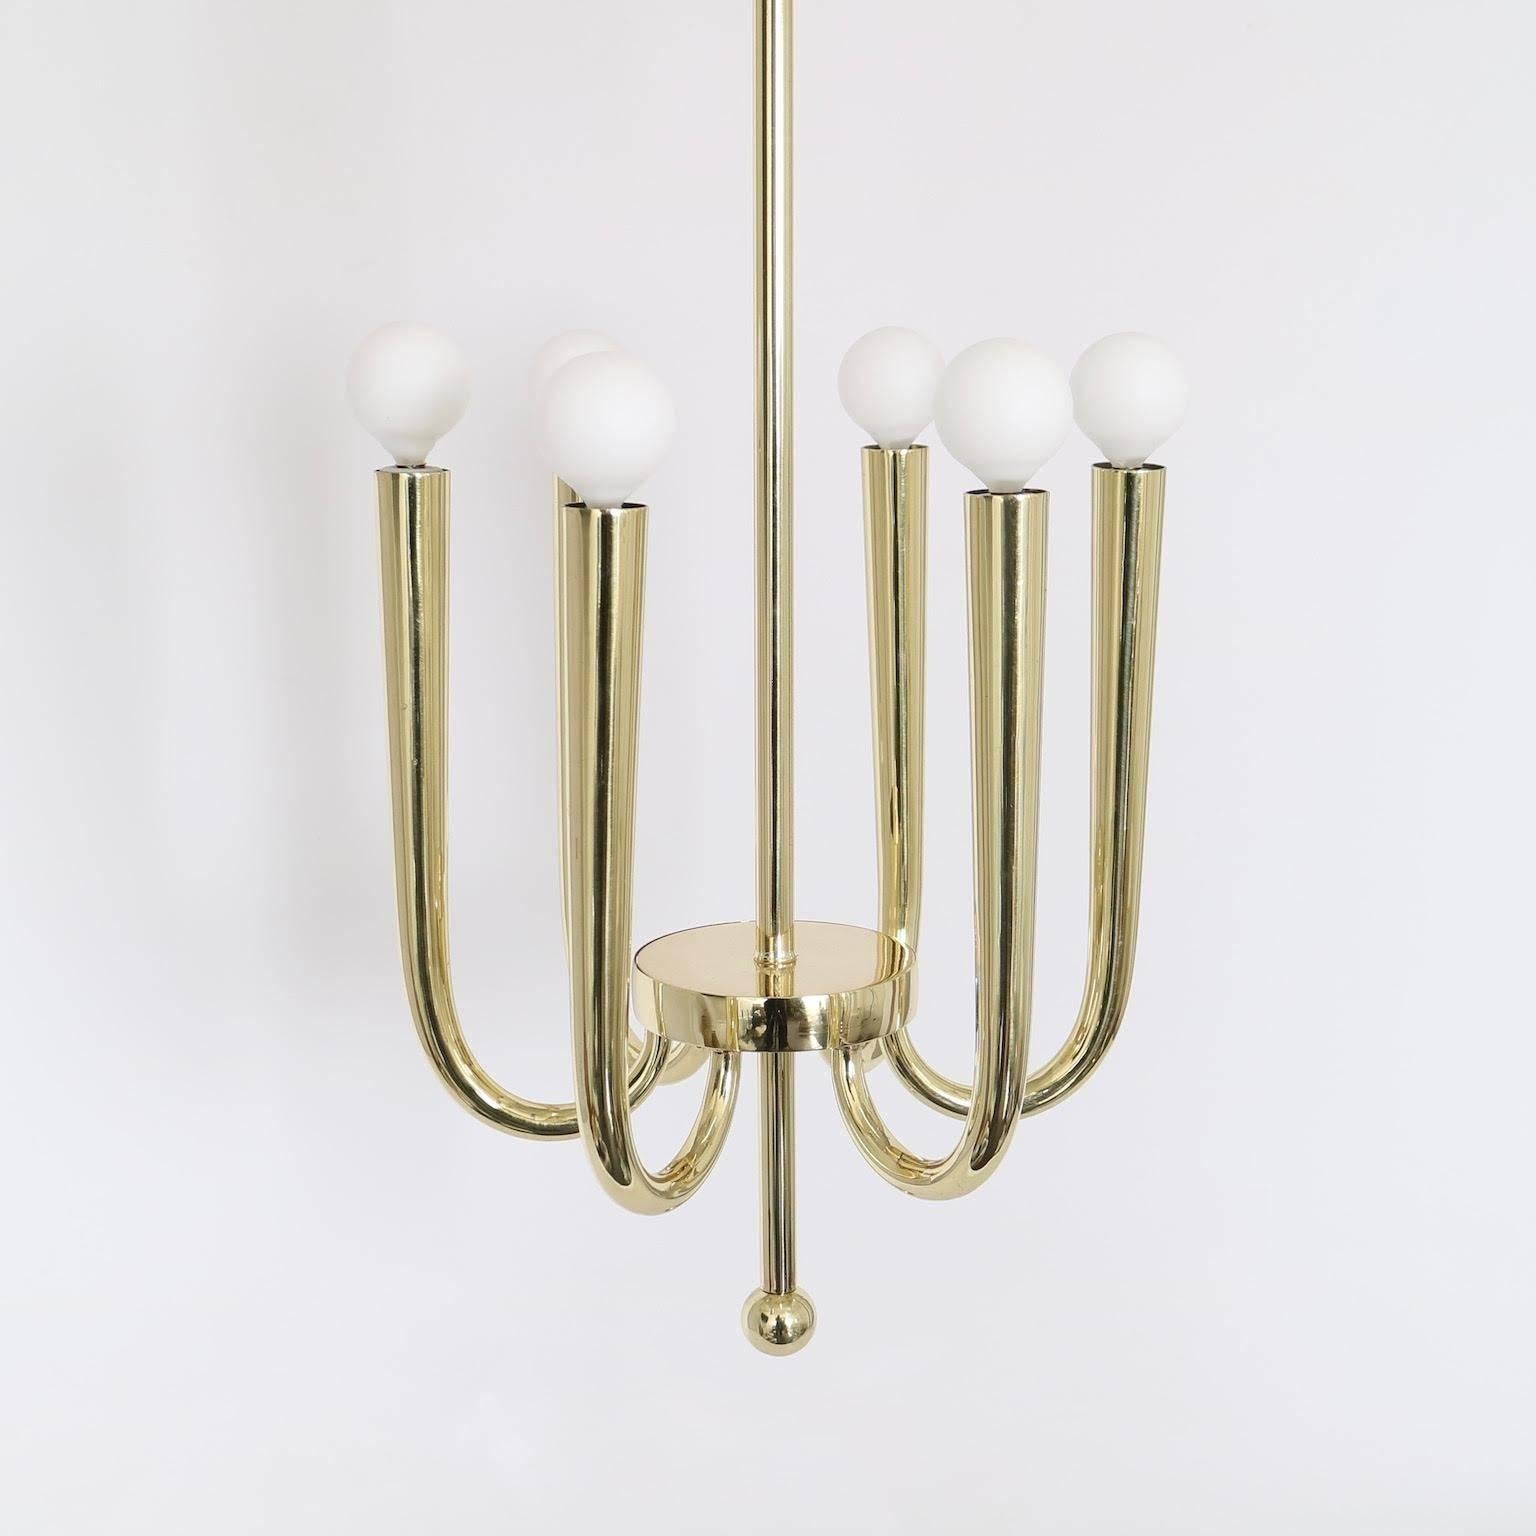 An Italian Art Deco period six-light brass chandelier, attributed to designer Gio Ponti. This chandelier came from a house in Rome, built within the 1930s era. Very good vintage condition, consistent with age and use, completely restored, polished